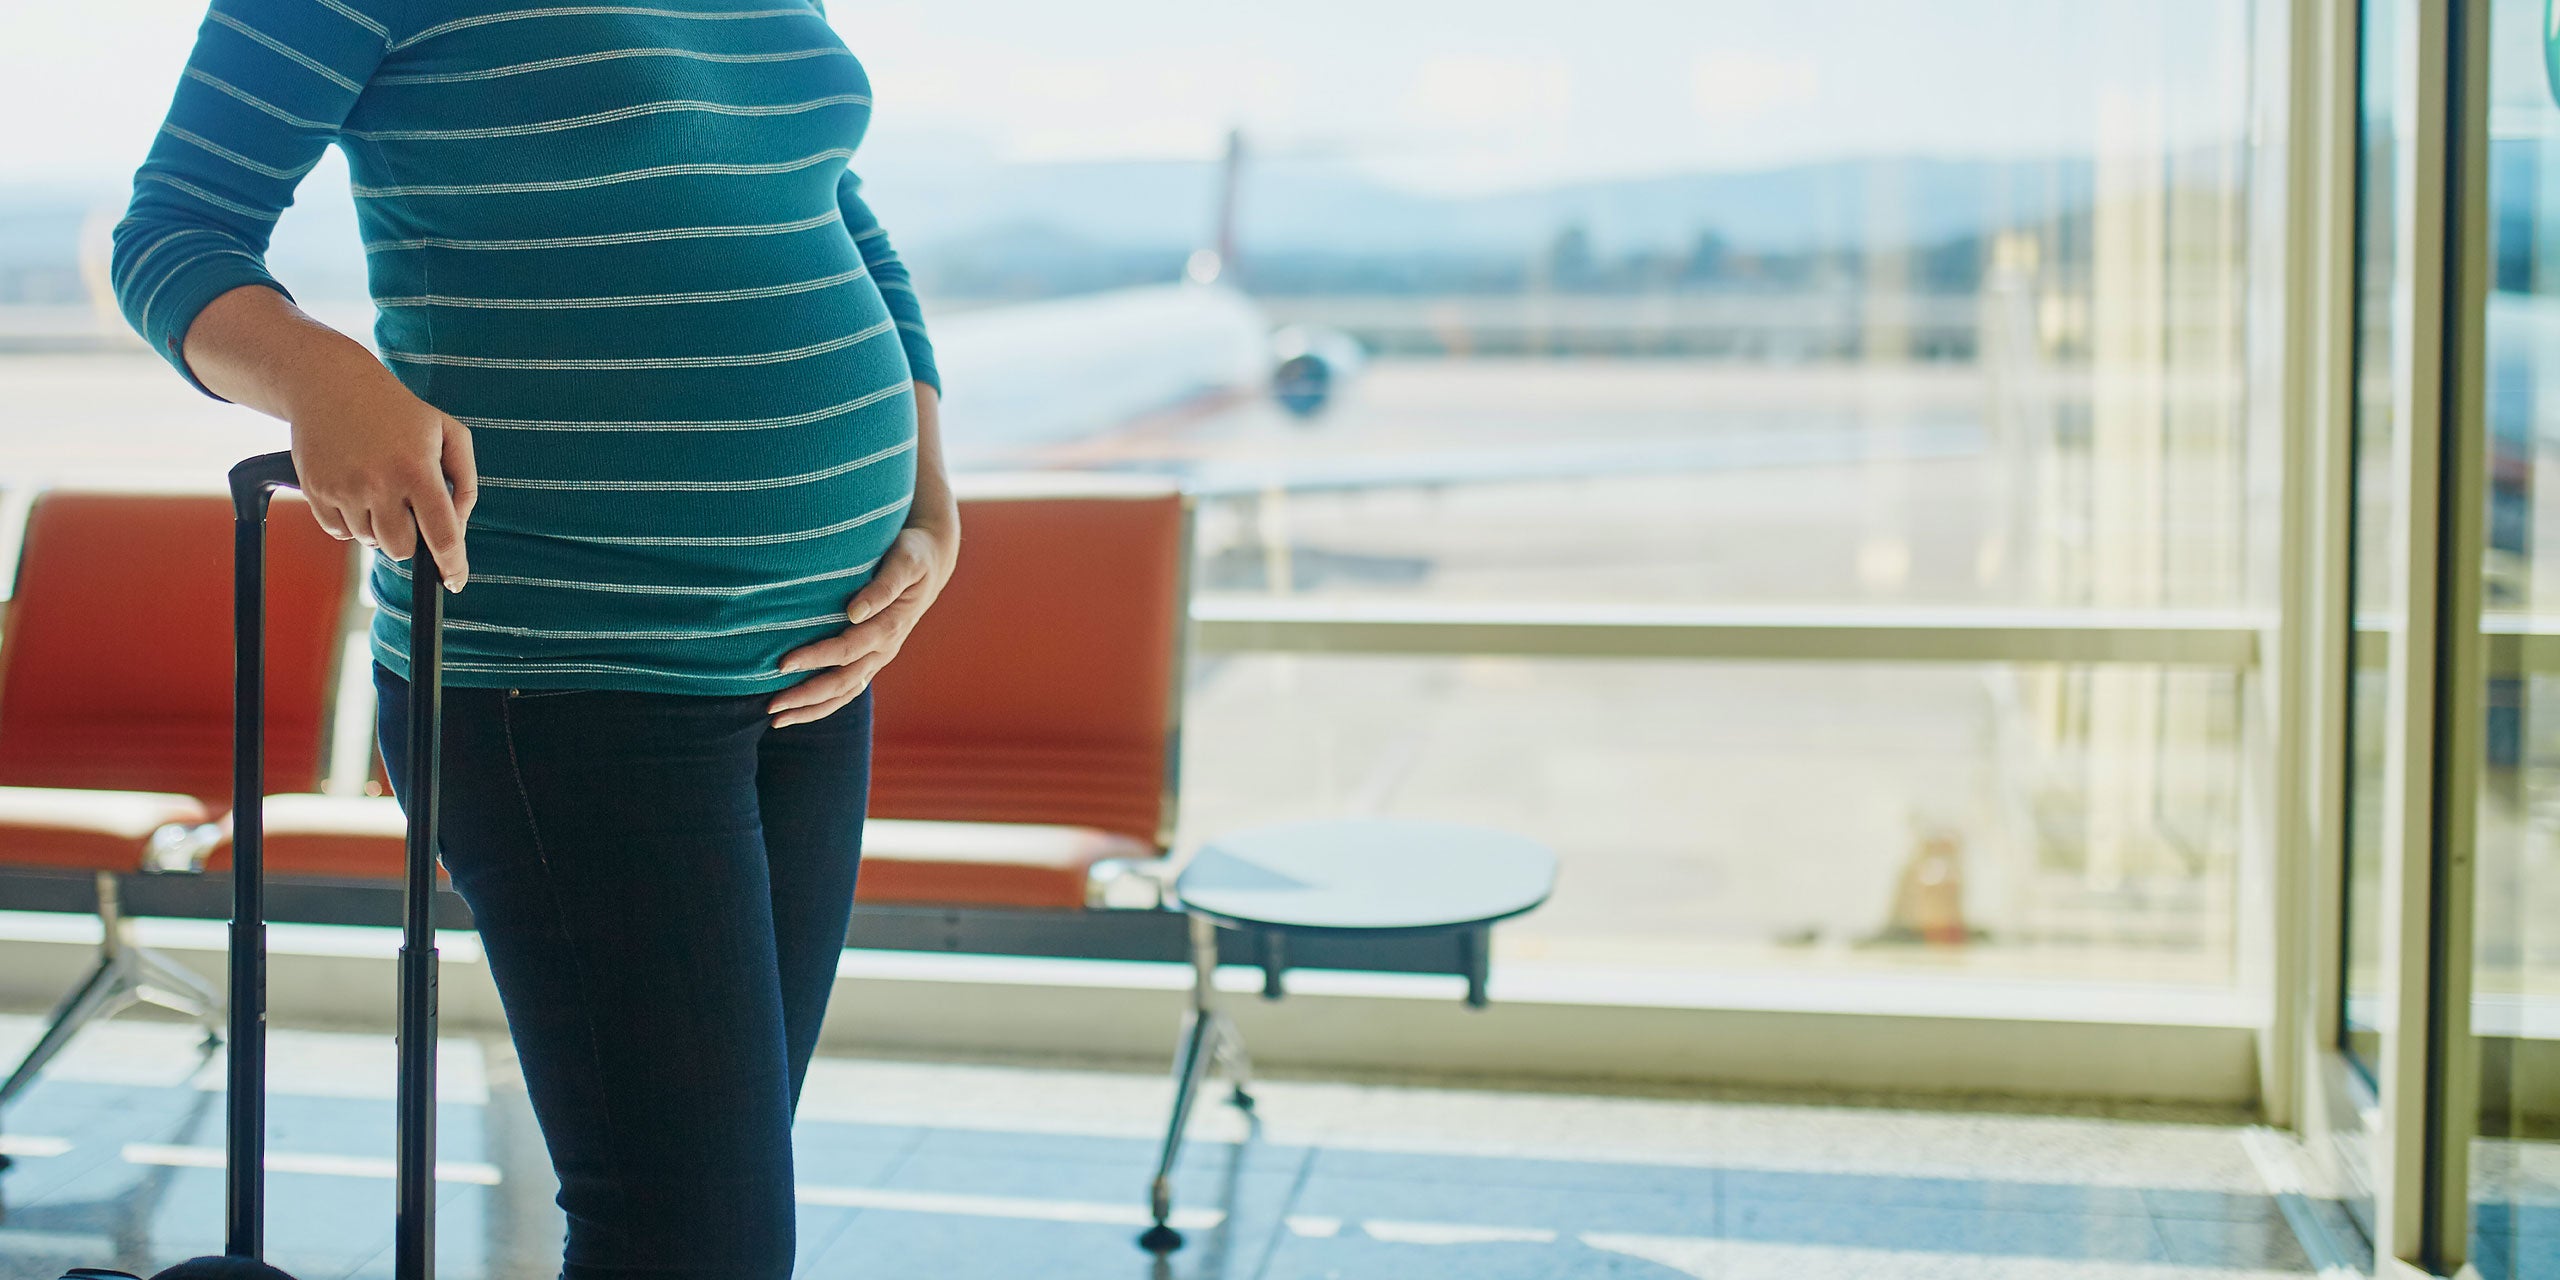 The Do's and Don'ts of Traveling During Pregnancy